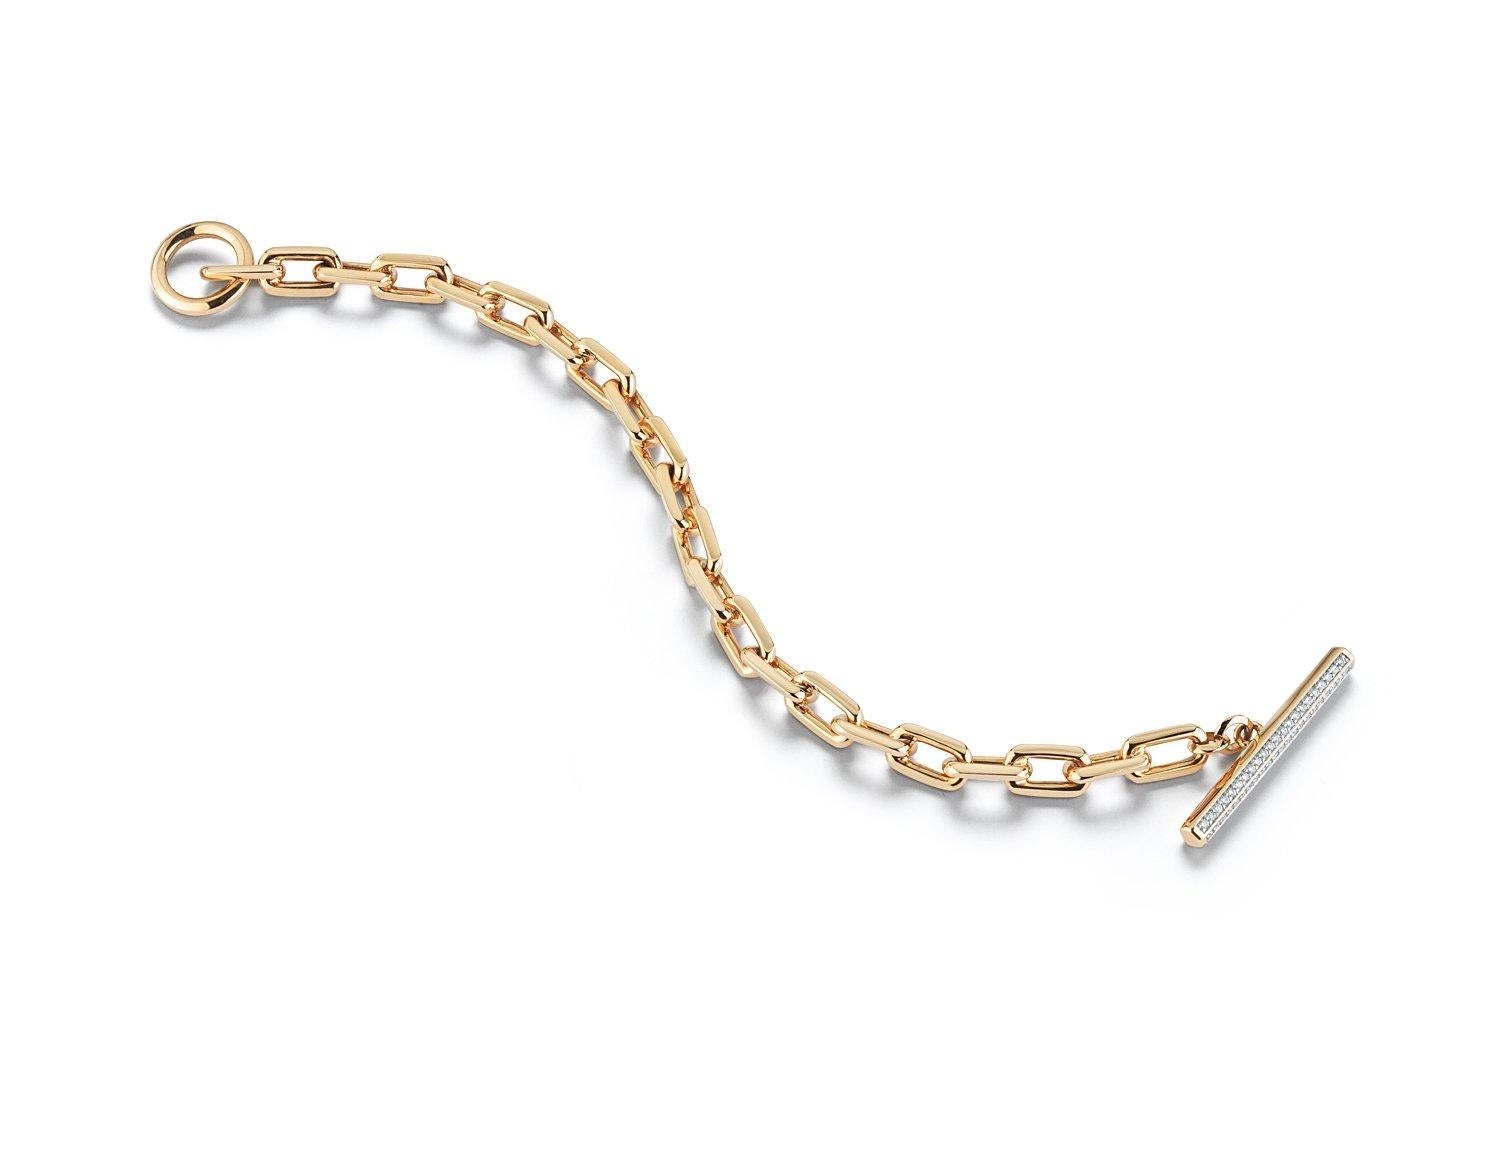 Walters Faith's Saxon Collection 18K Rose Gold and Diamond Chain Link Toggle Bracelet. All links are solid 18K, they are not hollow. Bracelet has 11 links and measures 6.5